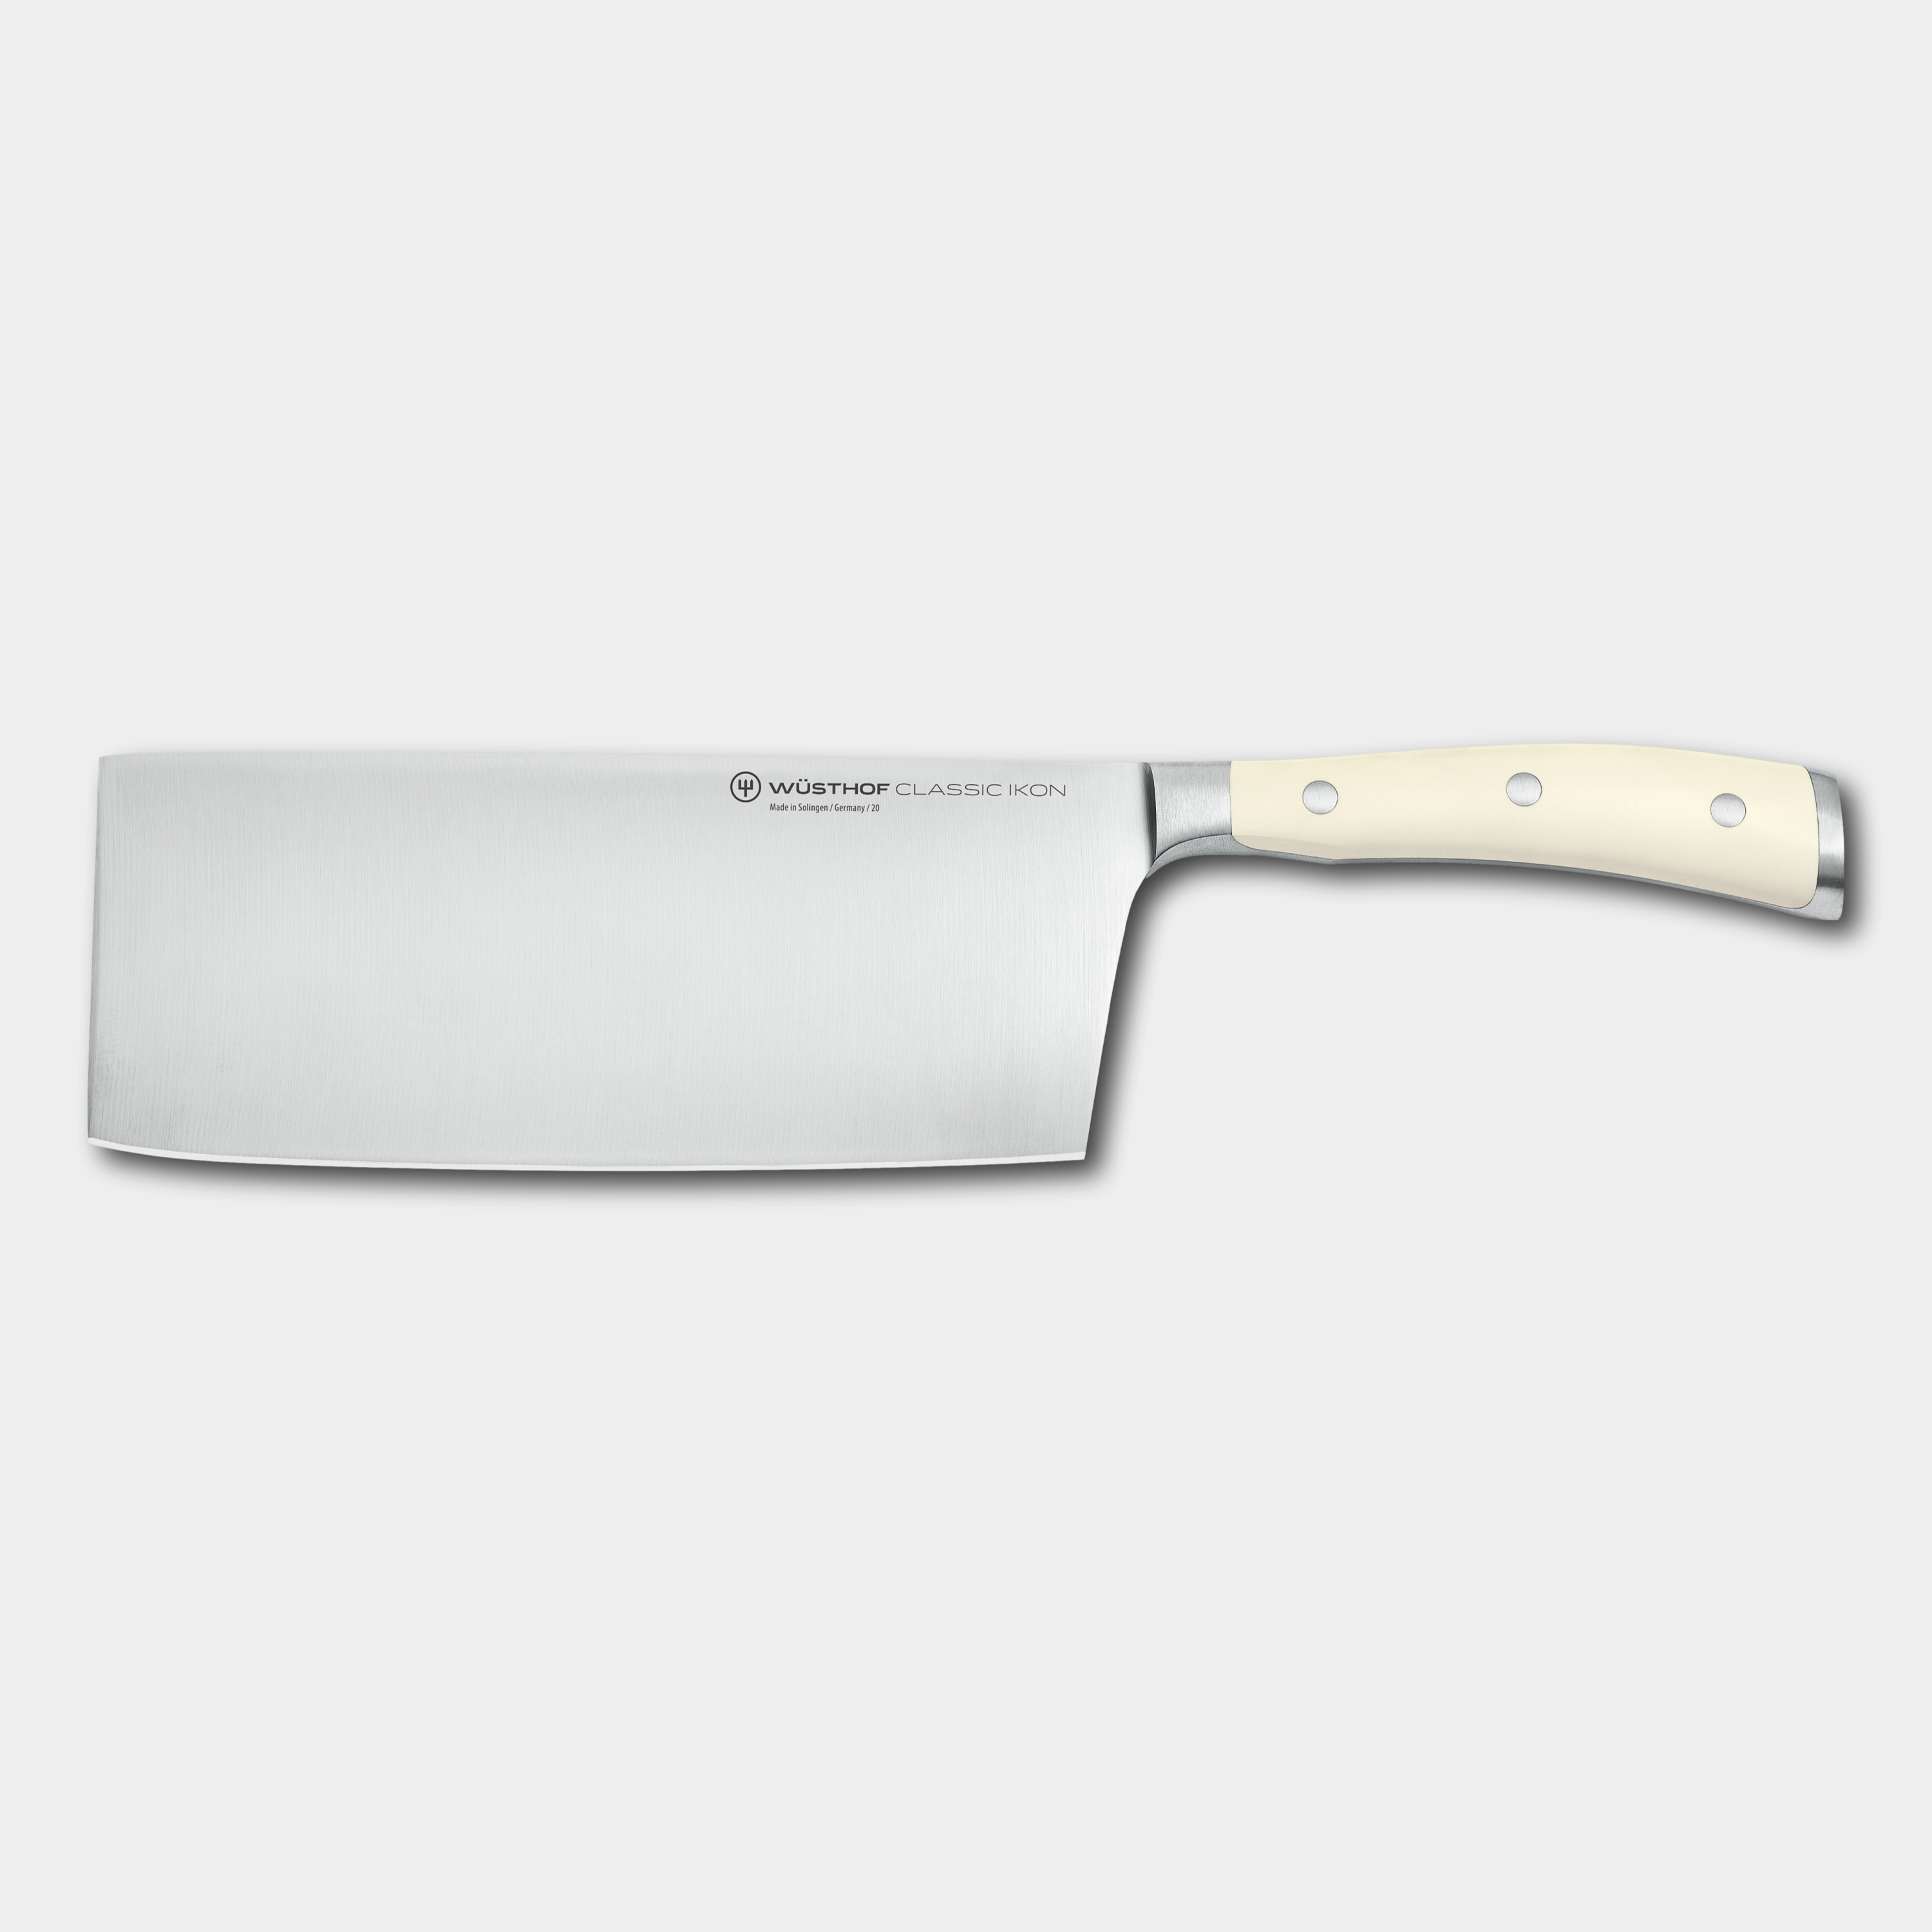 Wusthof Classic IKON Crème 18cm Chinese Chef's Knife